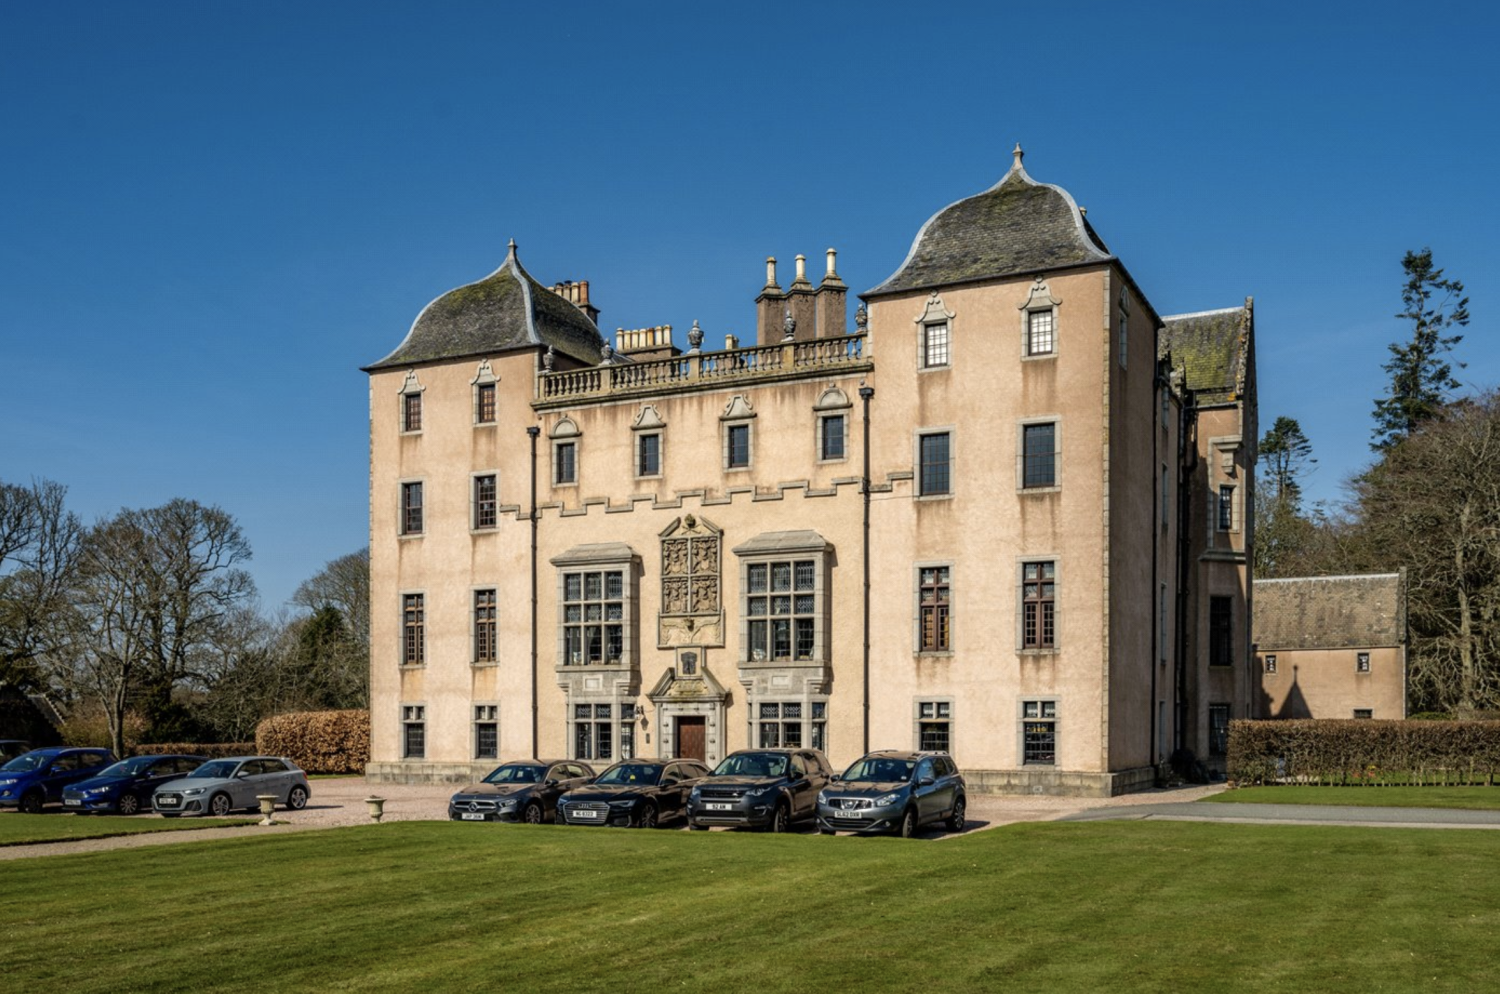 A grand mansion in Scotland with ornate windows and roof turrets